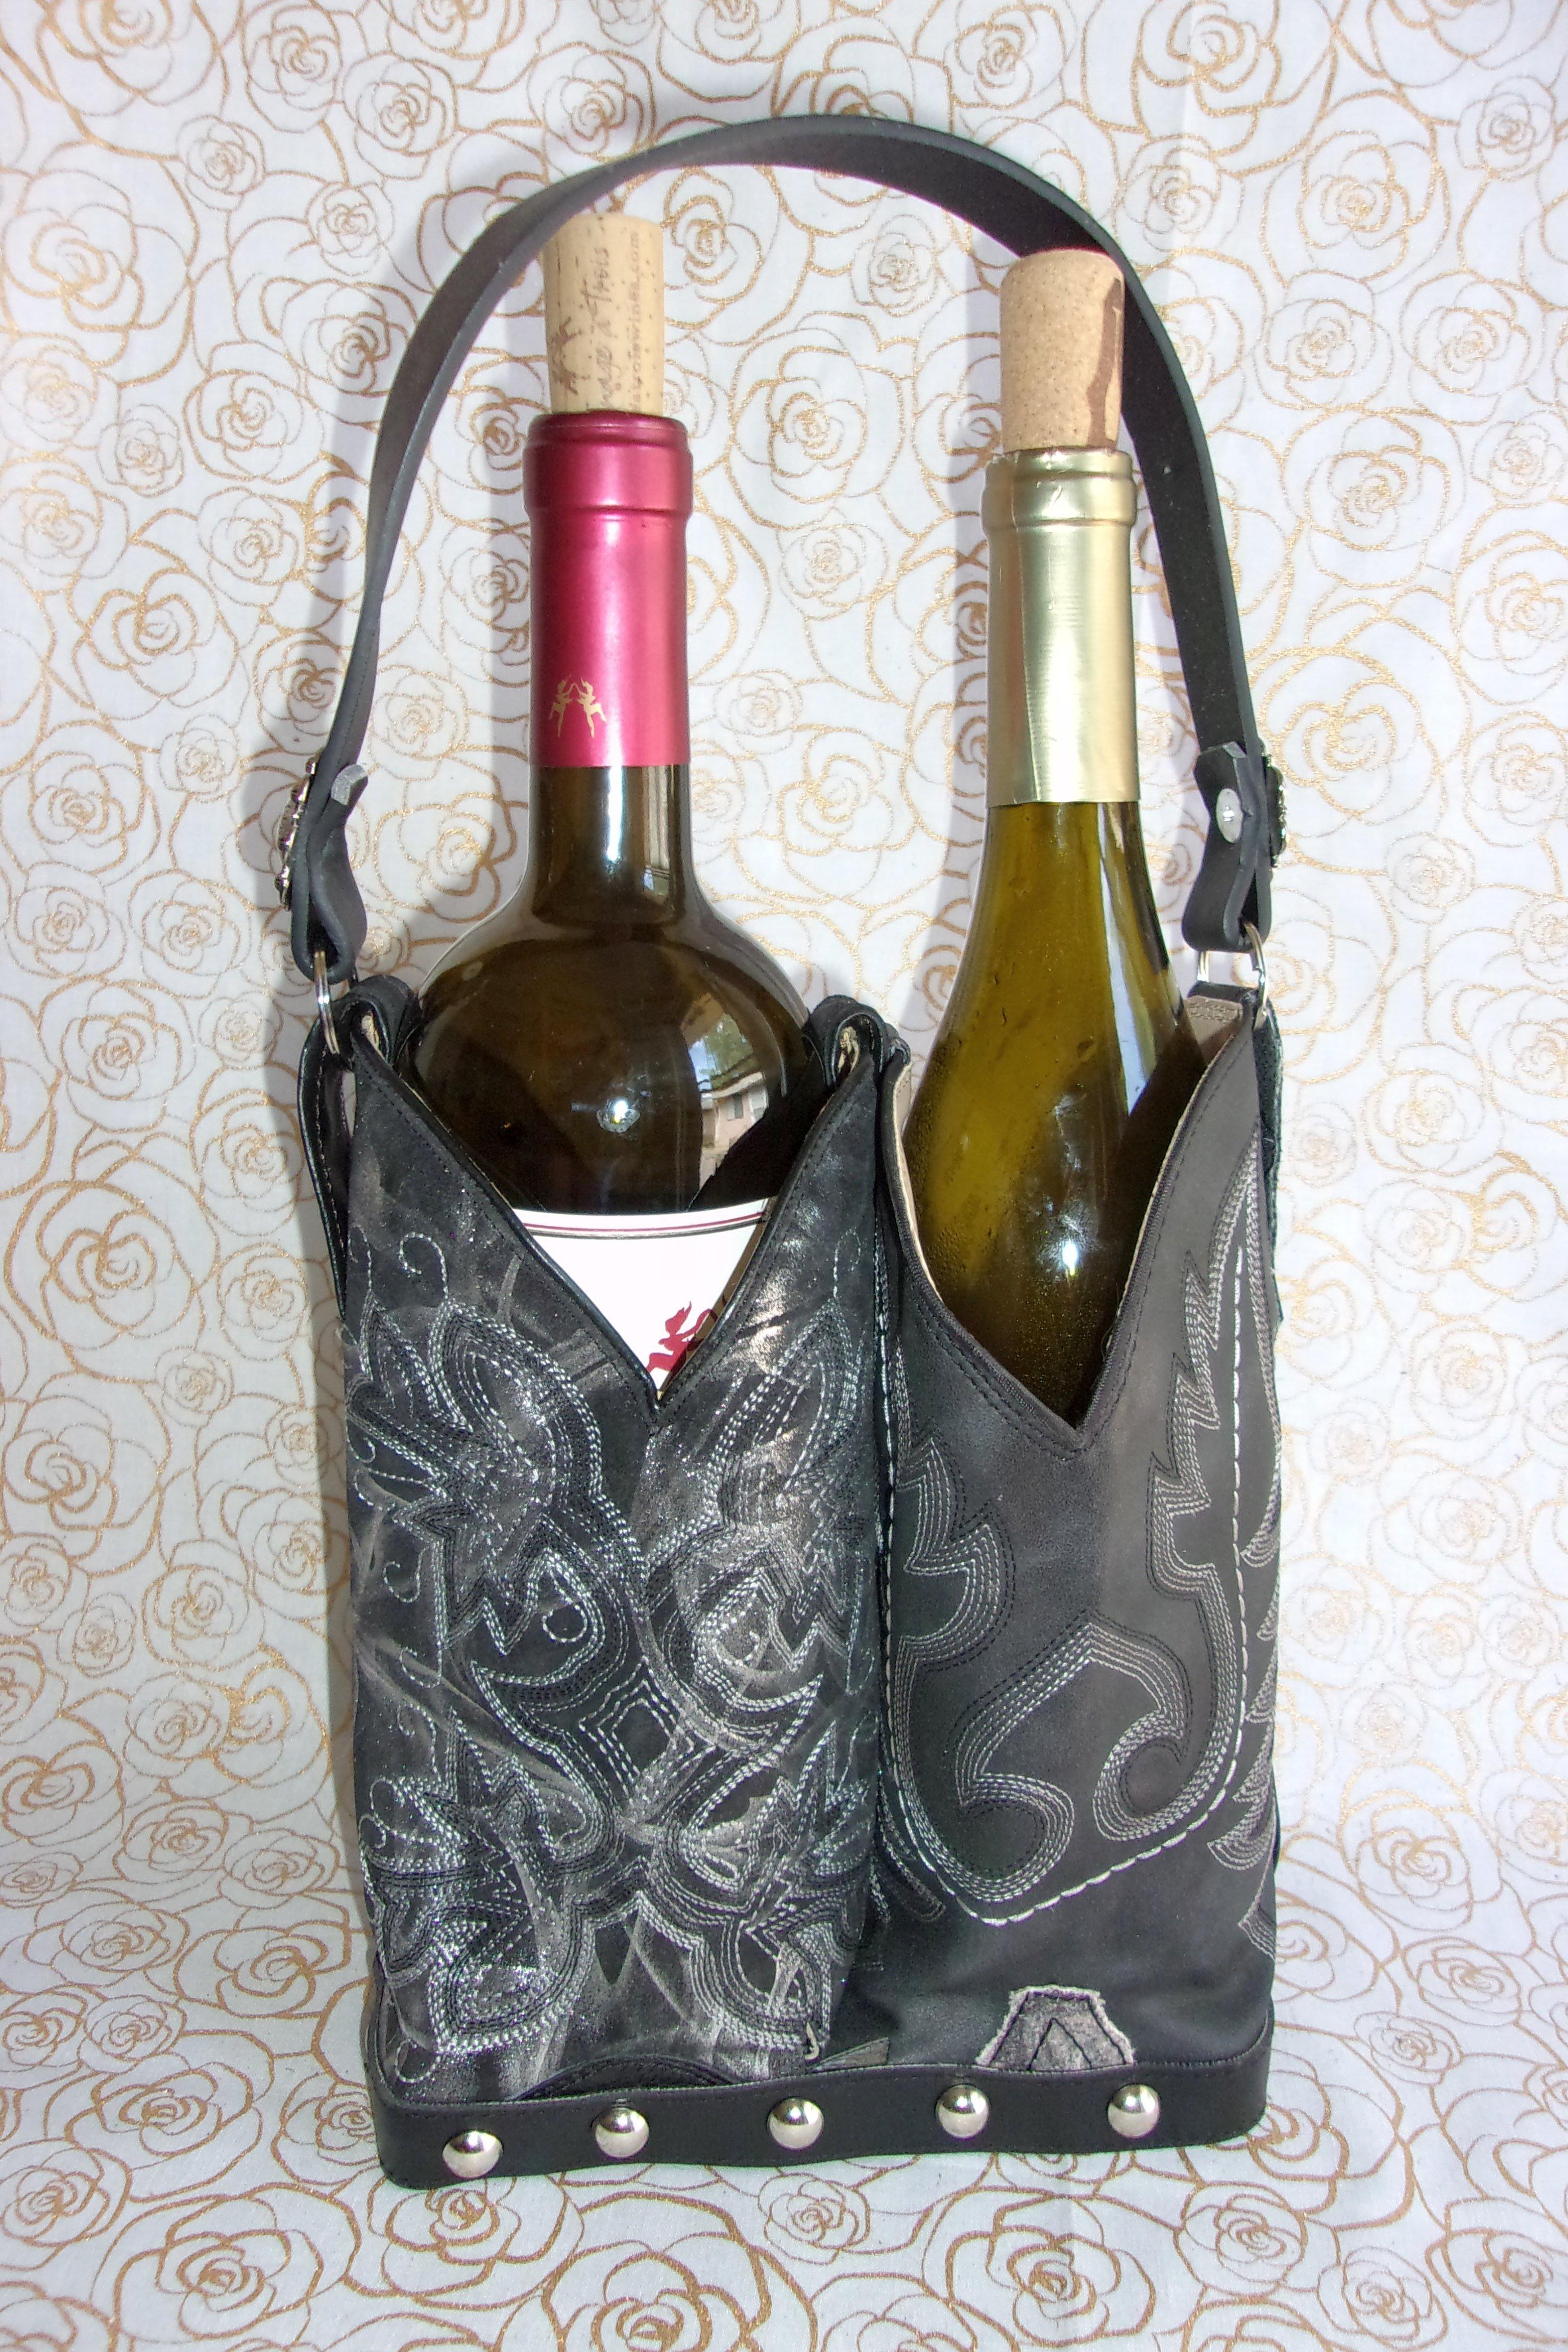 Double Wine Tote Bag - Leather Wine Carrier - Wine Lovers Gift – Wine Bag PP30 cowboy boot purses, western fringe purse, handmade leather purses, boot purse, handmade western purse, custom leather handbags Chris Thompson Bags